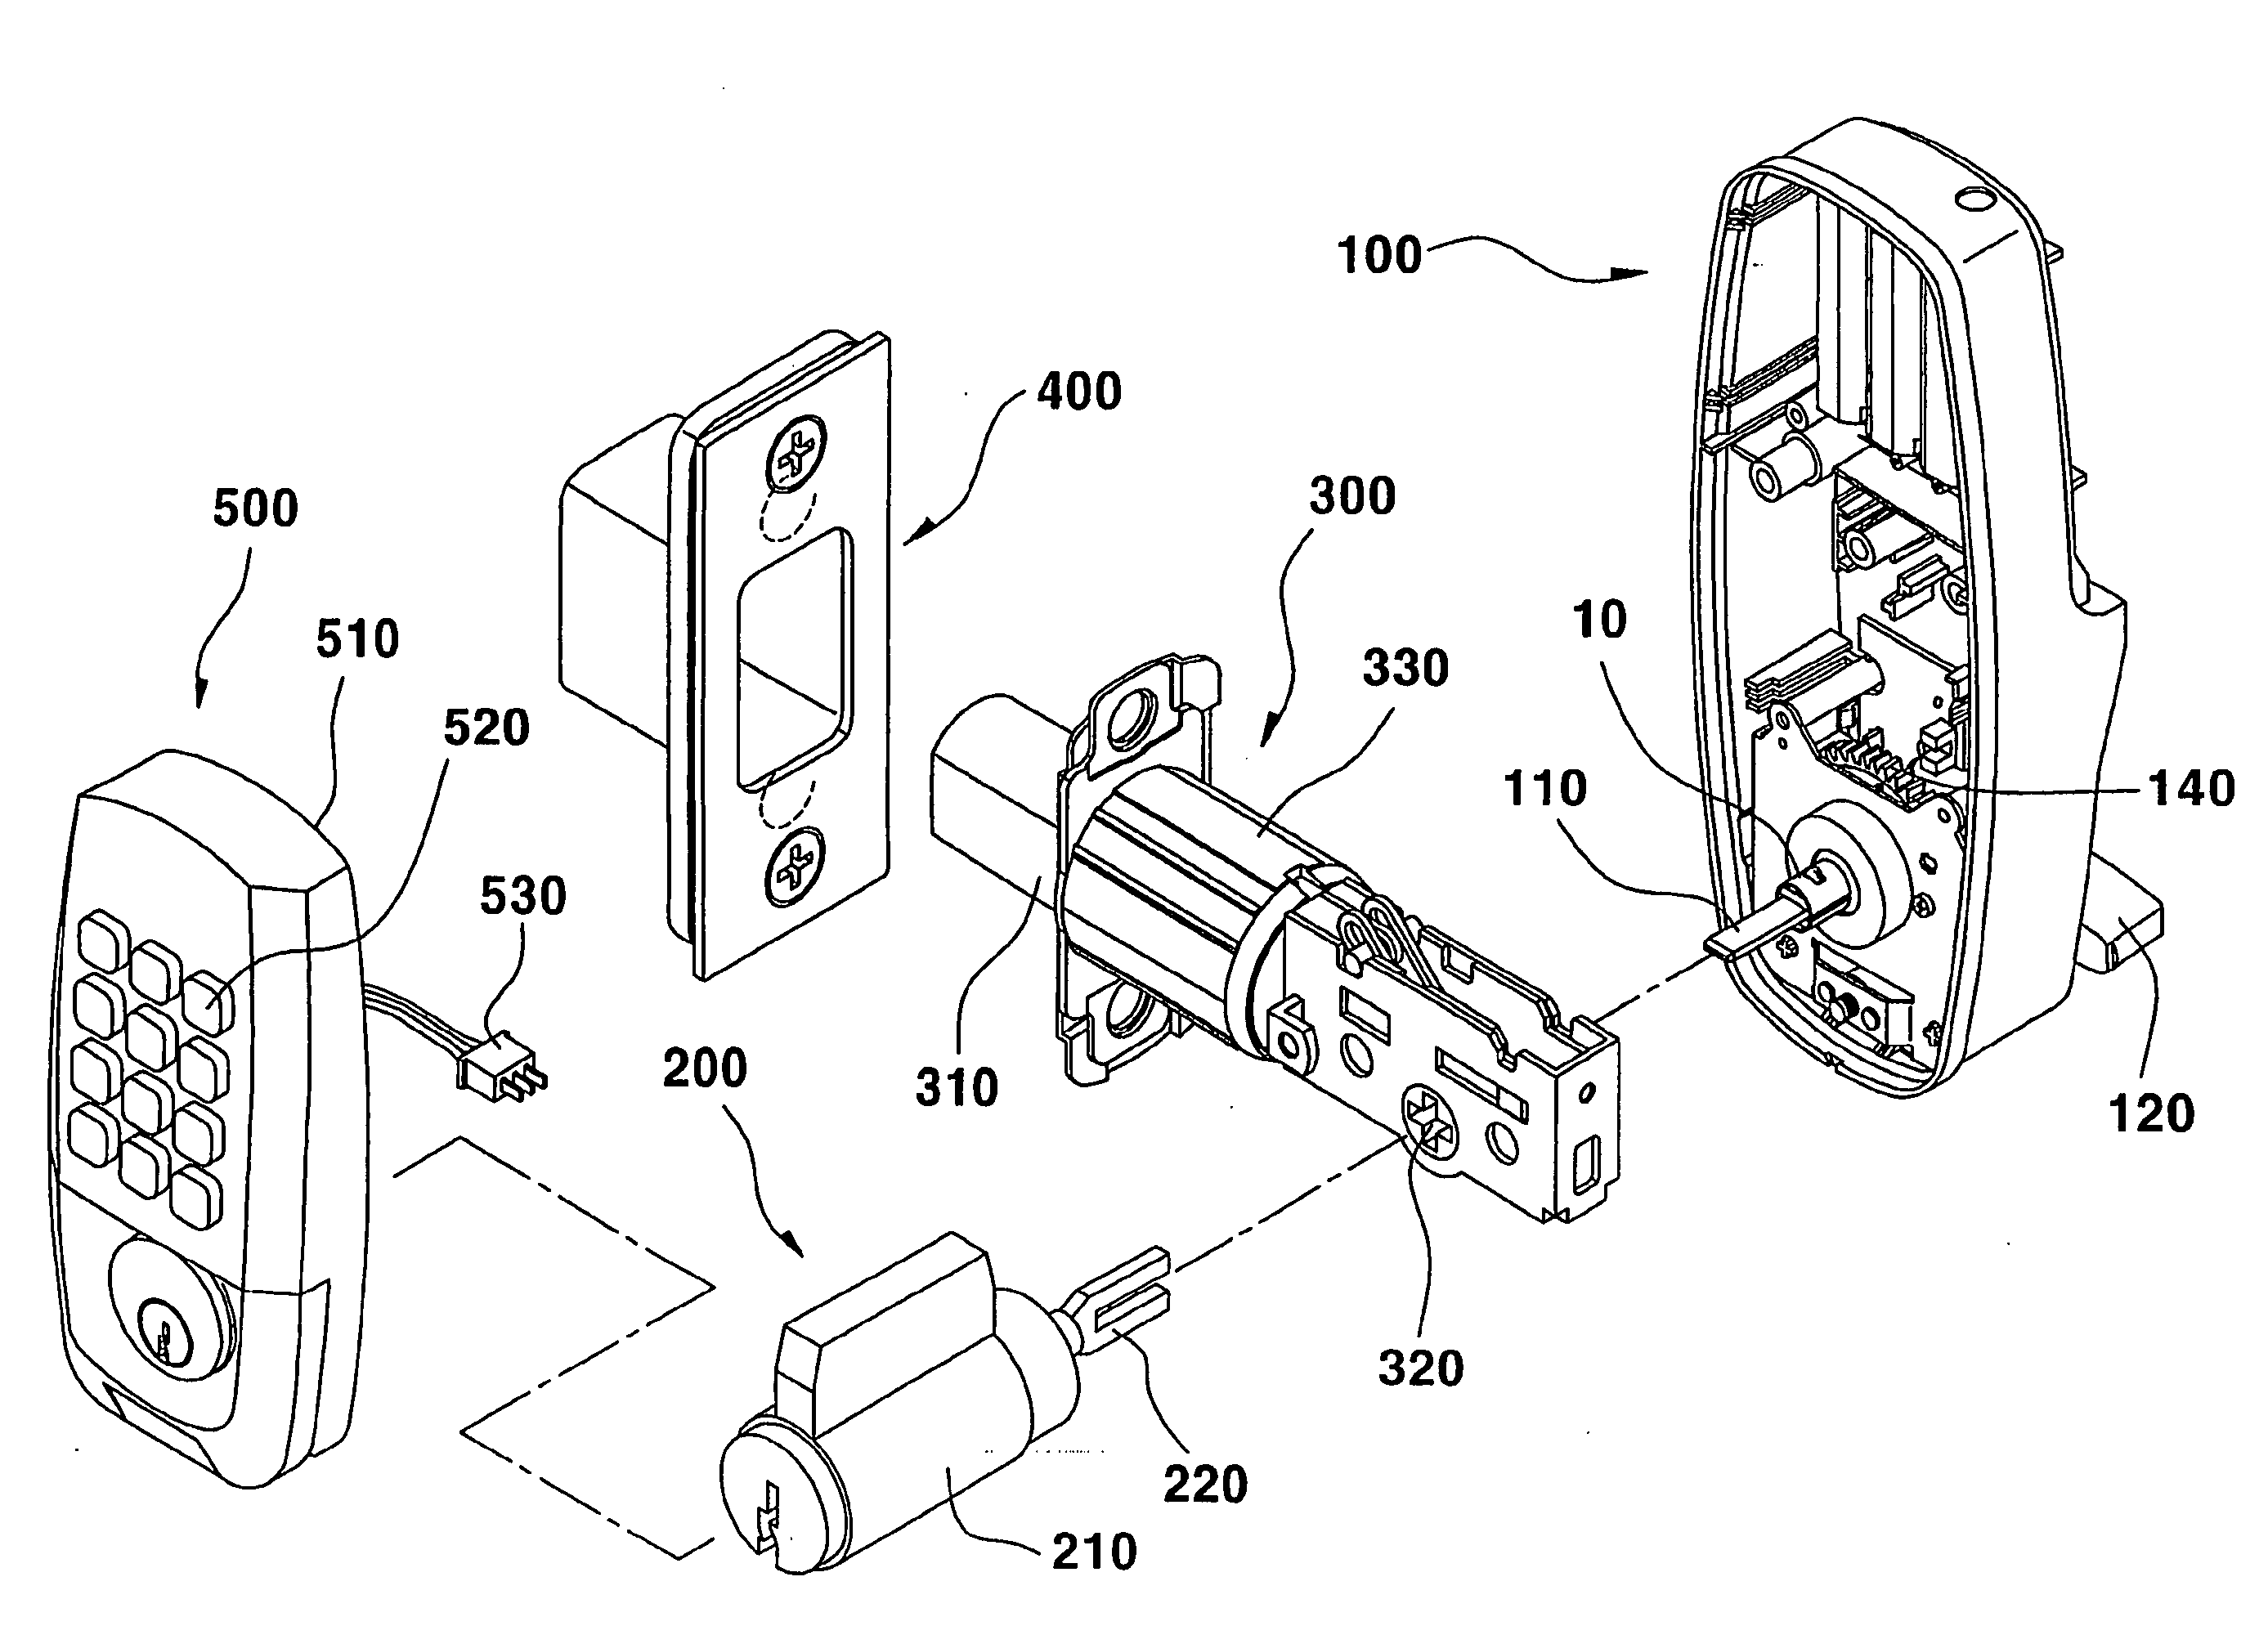 Digital door lock capable of detecting its operation states